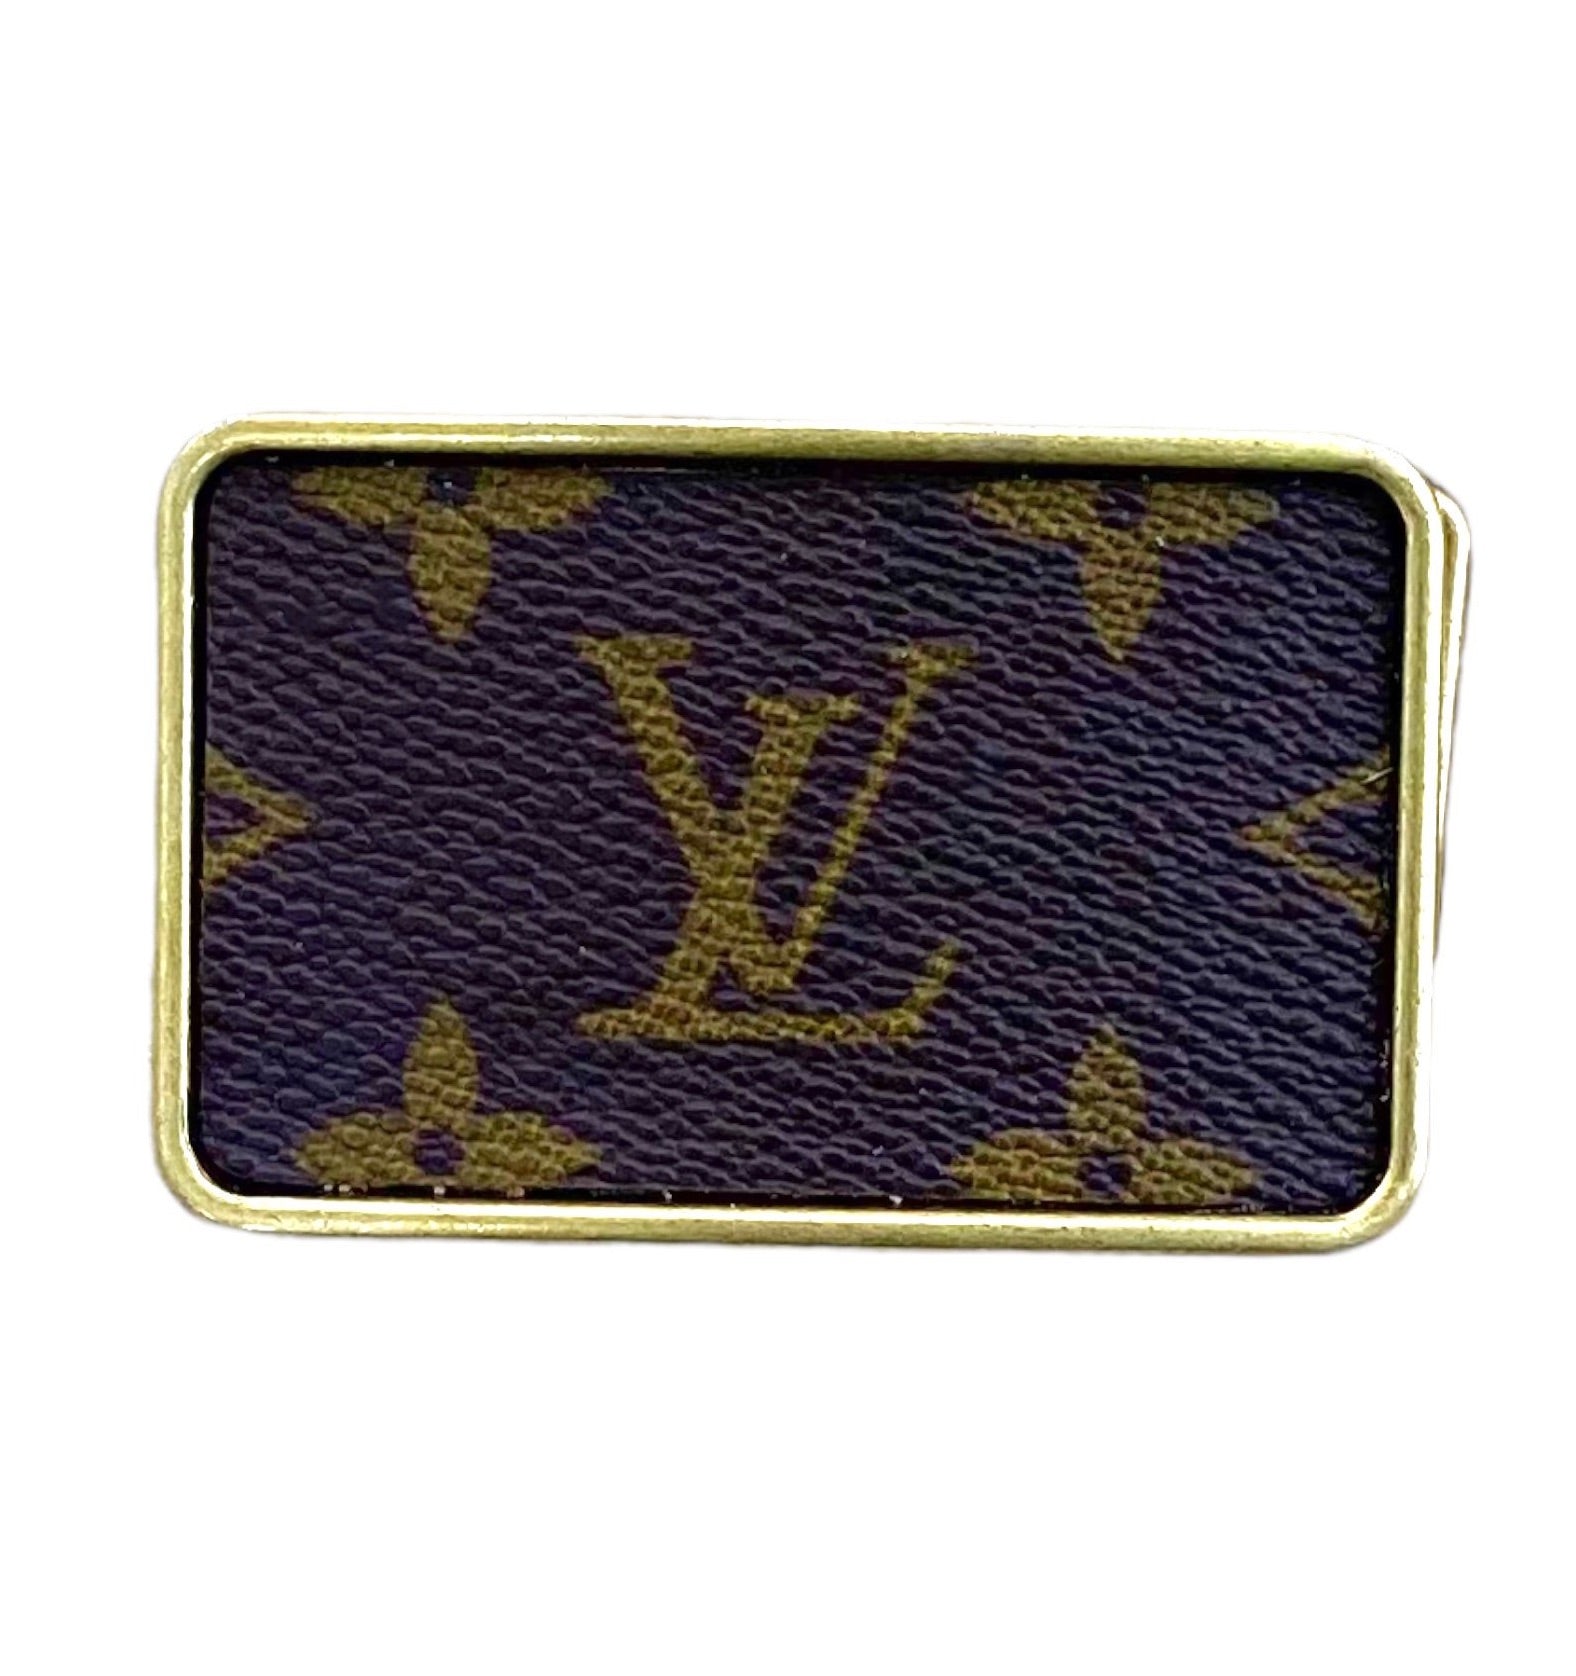 lv belt leather - Buy lv belt leather at Best Price in Malaysia